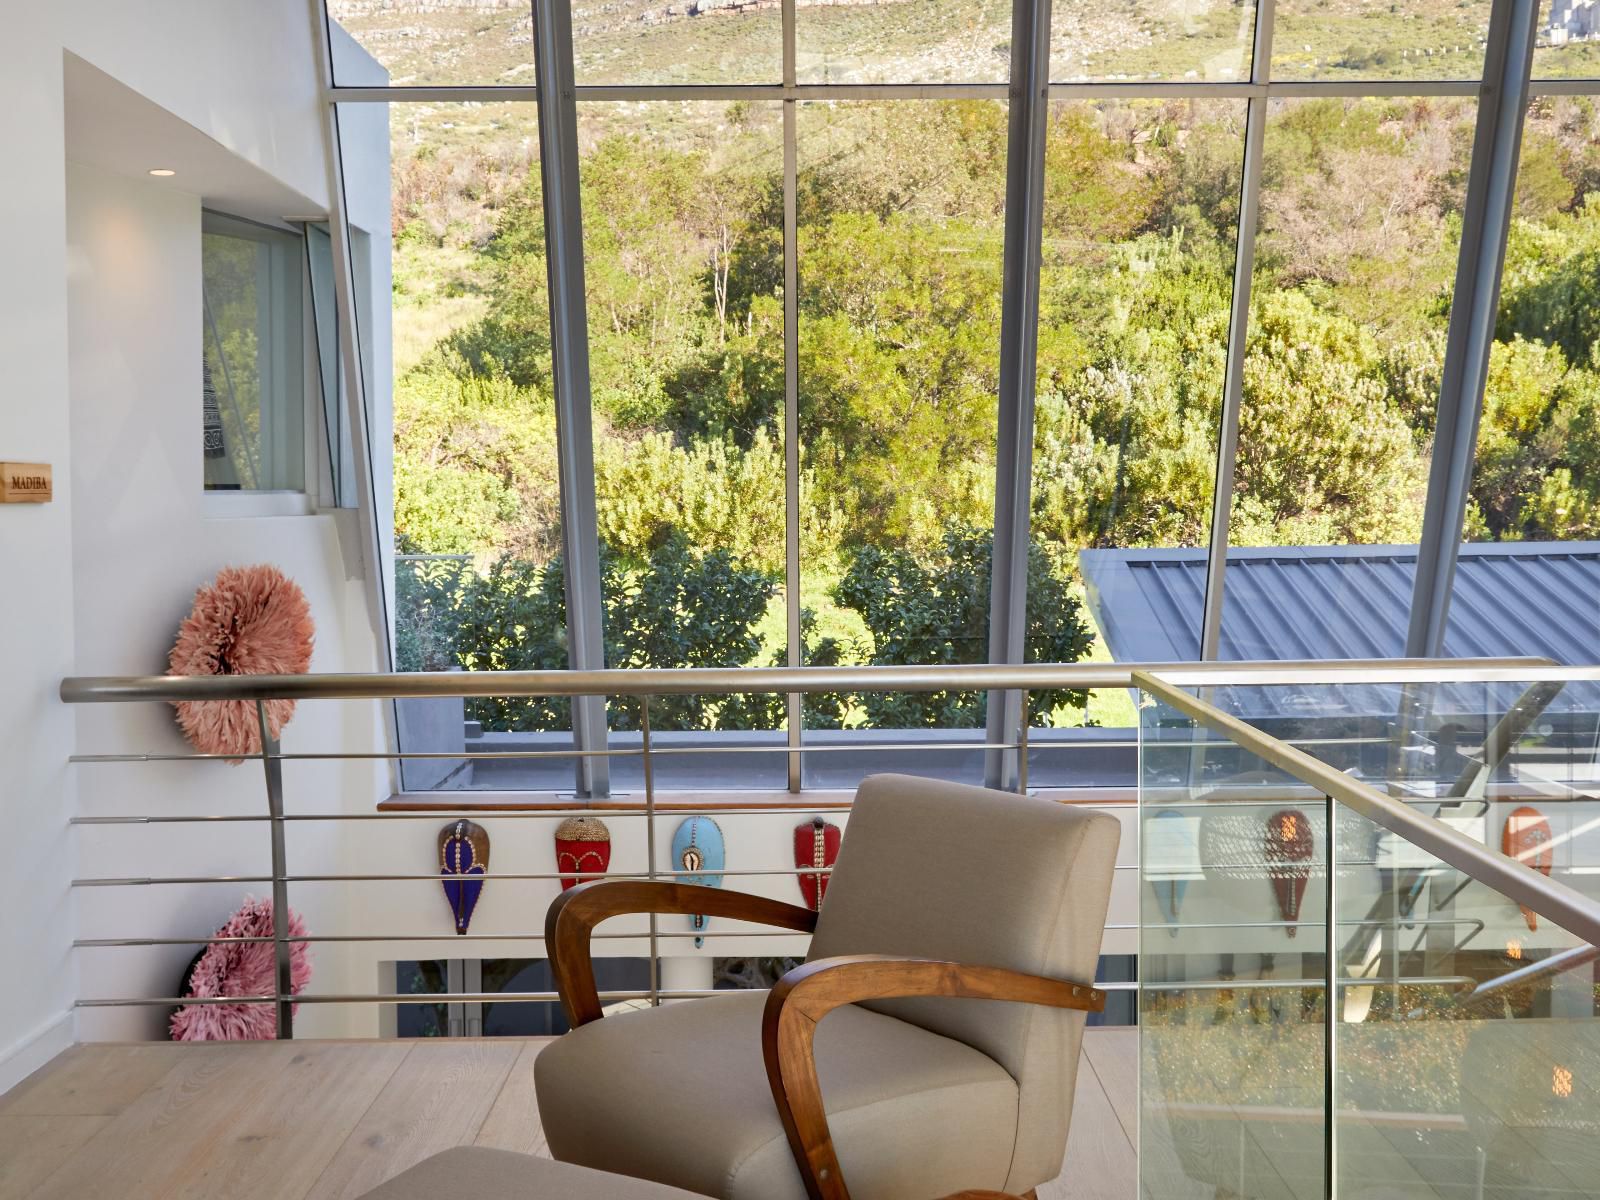 The Residence By Atzaro Cape Town Oranjezicht Cape Town Western Cape South Africa Balcony, Architecture, Garden, Nature, Plant, Living Room